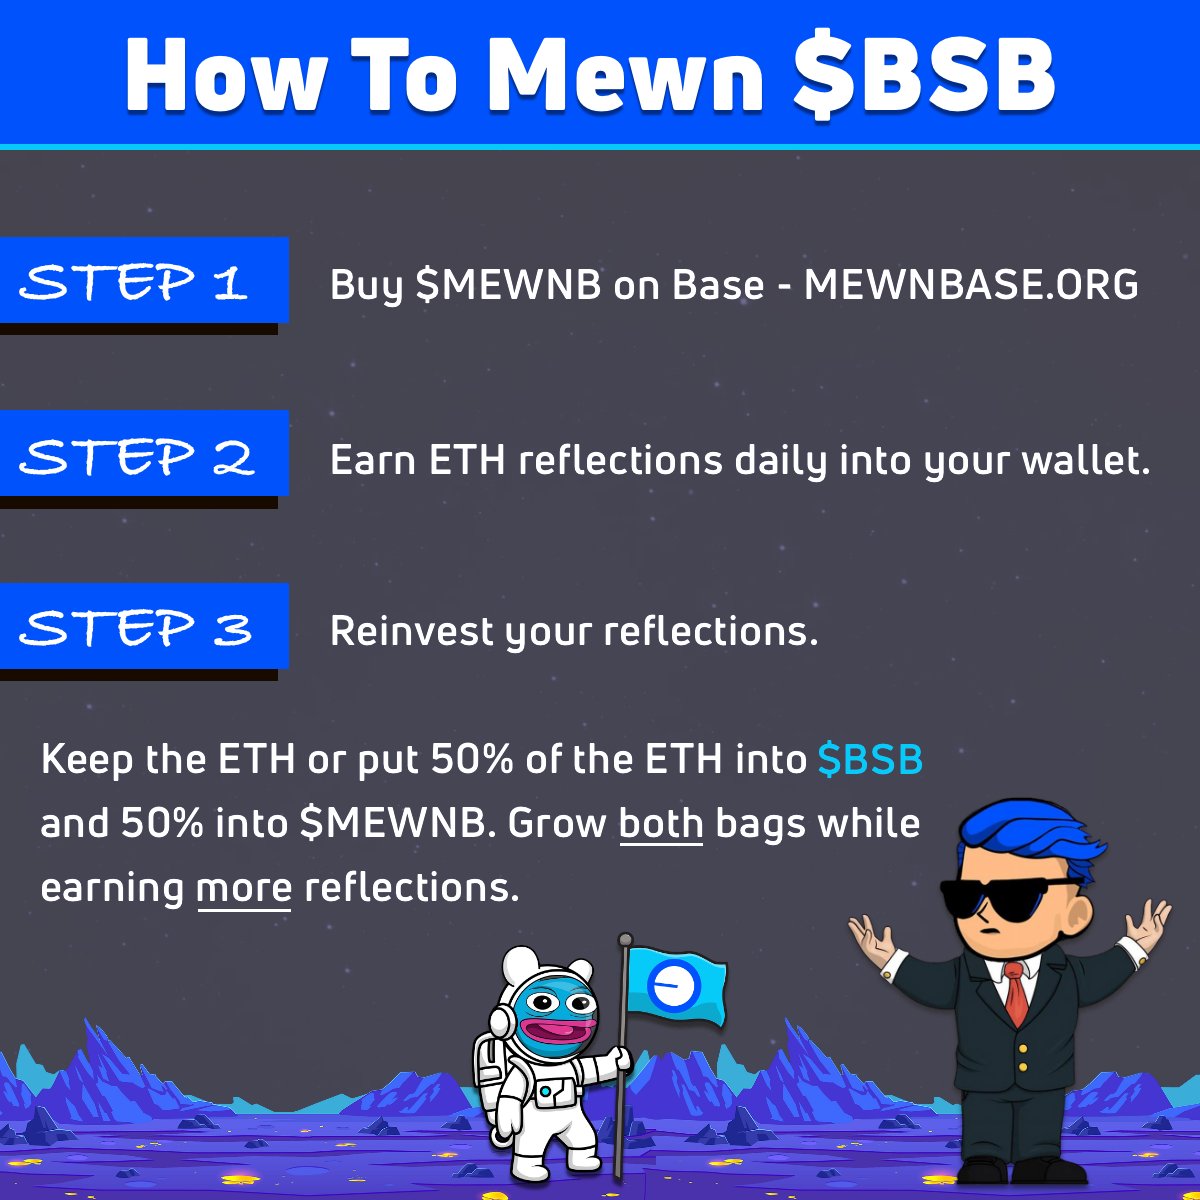 Hey Based Street Bets holders and lovers of @base. We are doing our part to help onboard one billion people onchain and we support all Base projects. We’re MewnBase. Our contract is renounced, liquidity is burned, and we’re audited. We provide daily ETH “Reflections” for